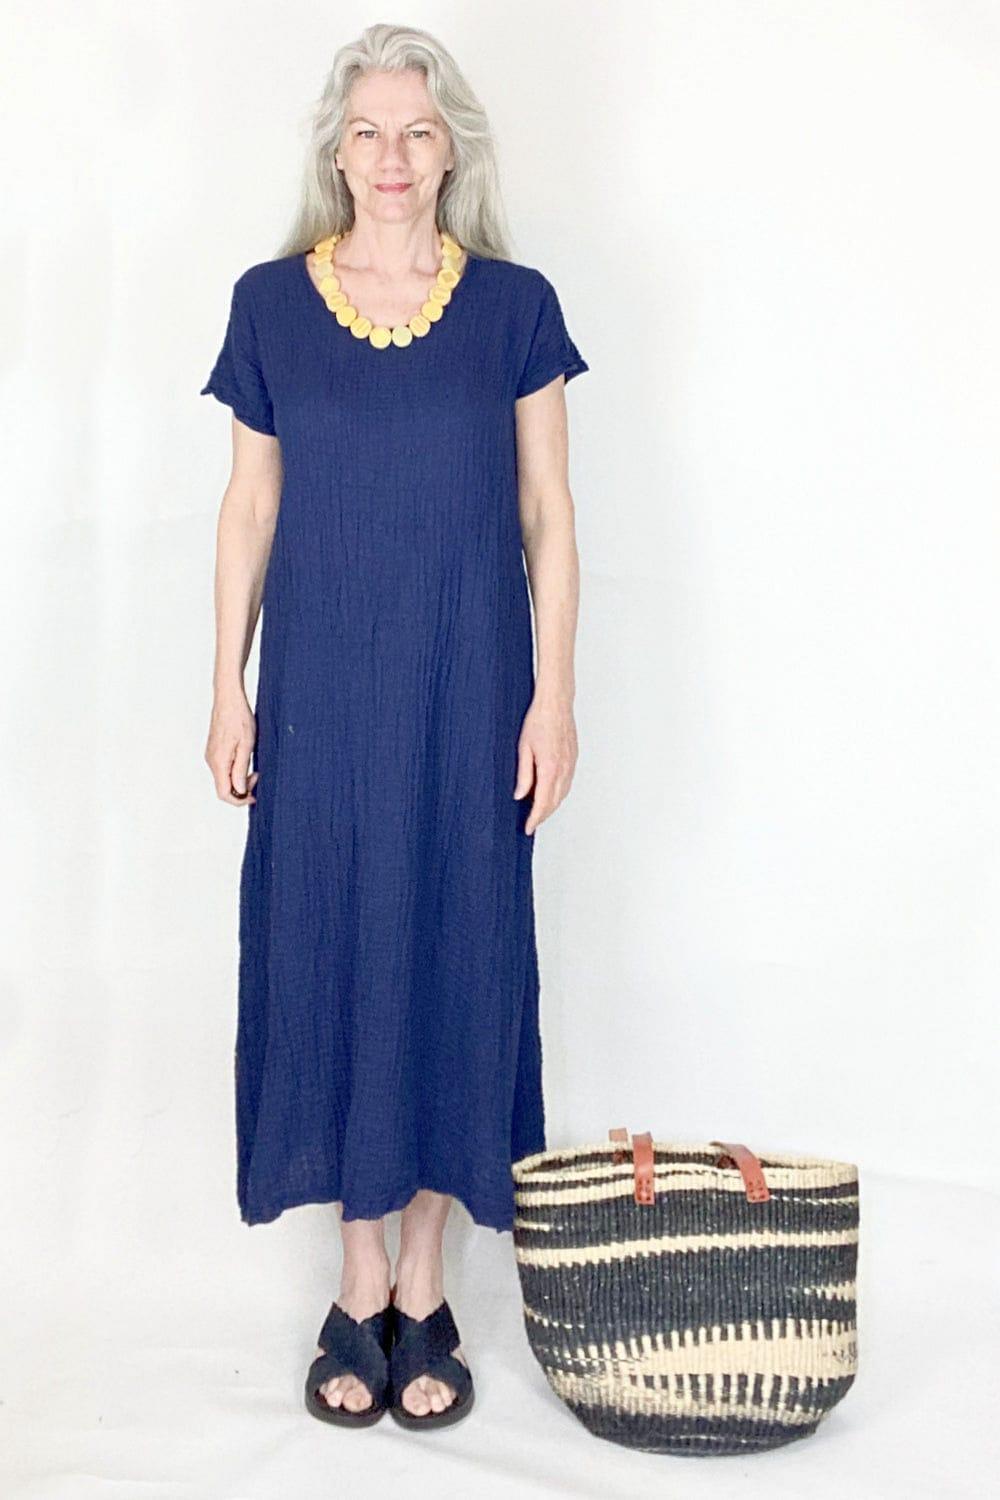 Navy short sleeve long cotton dress being worn by an older smiling woman. She is also wearing a yellow beaded necklace and black sandles